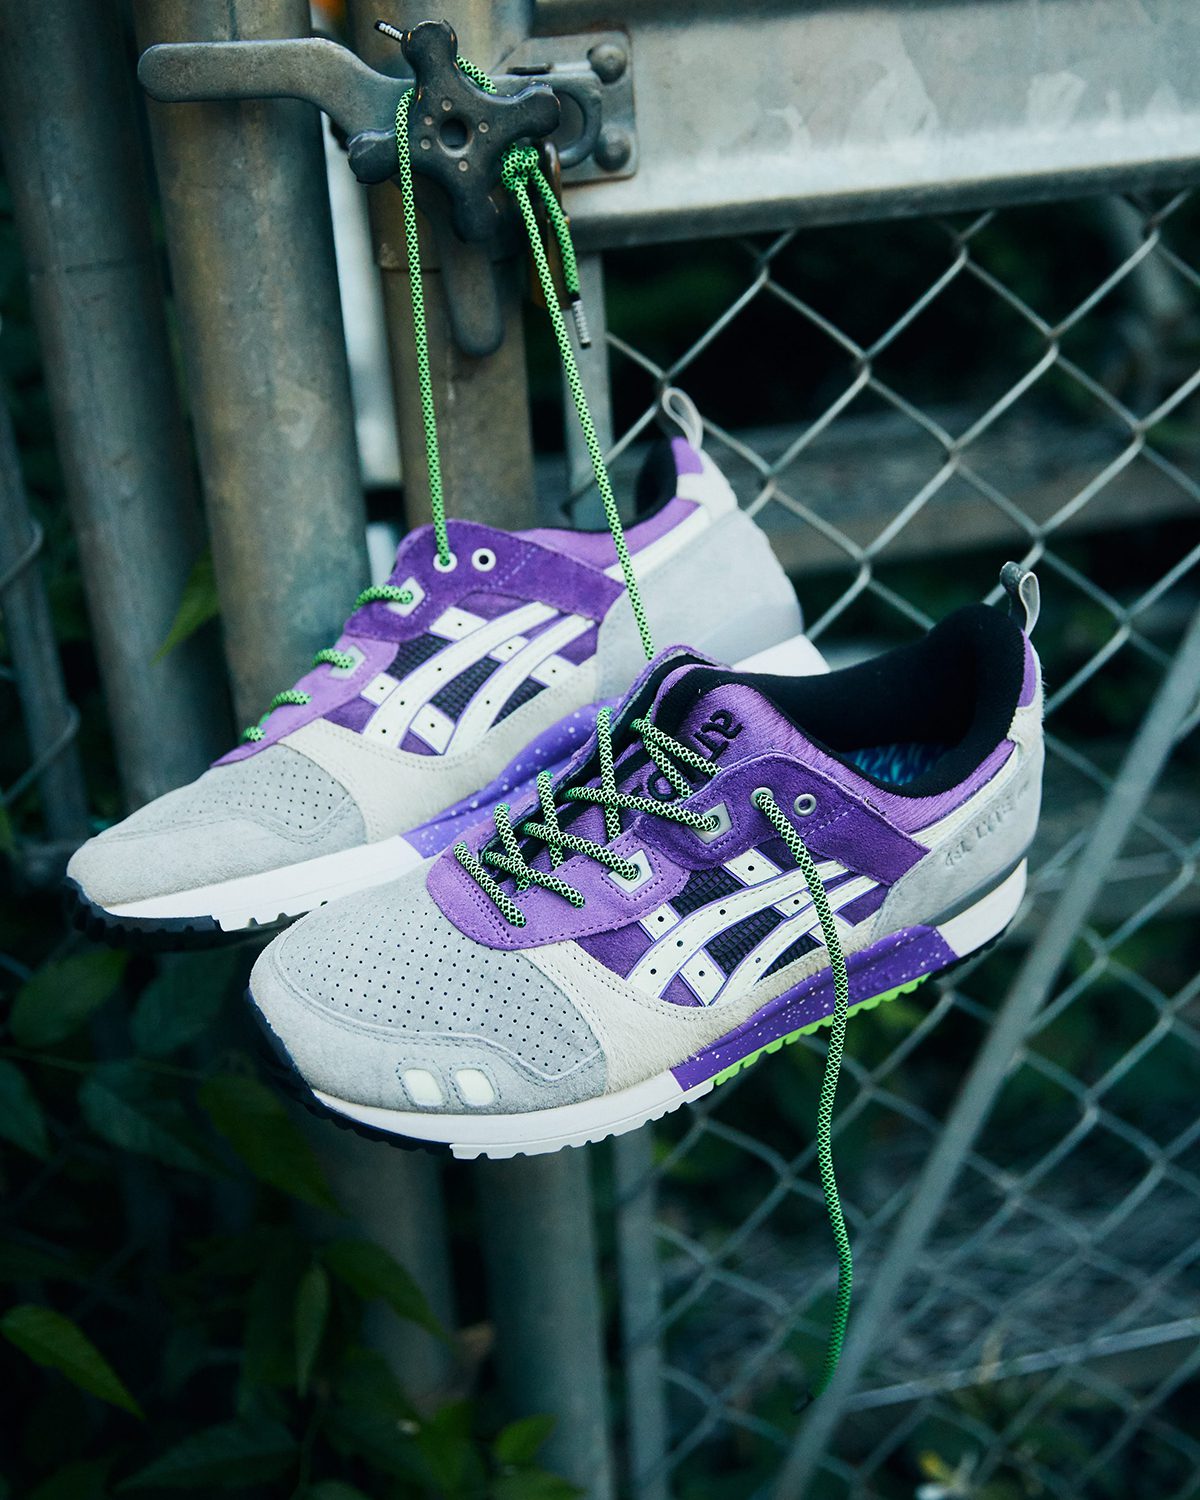 ASICS Gel Lyte 3 Alley Cats